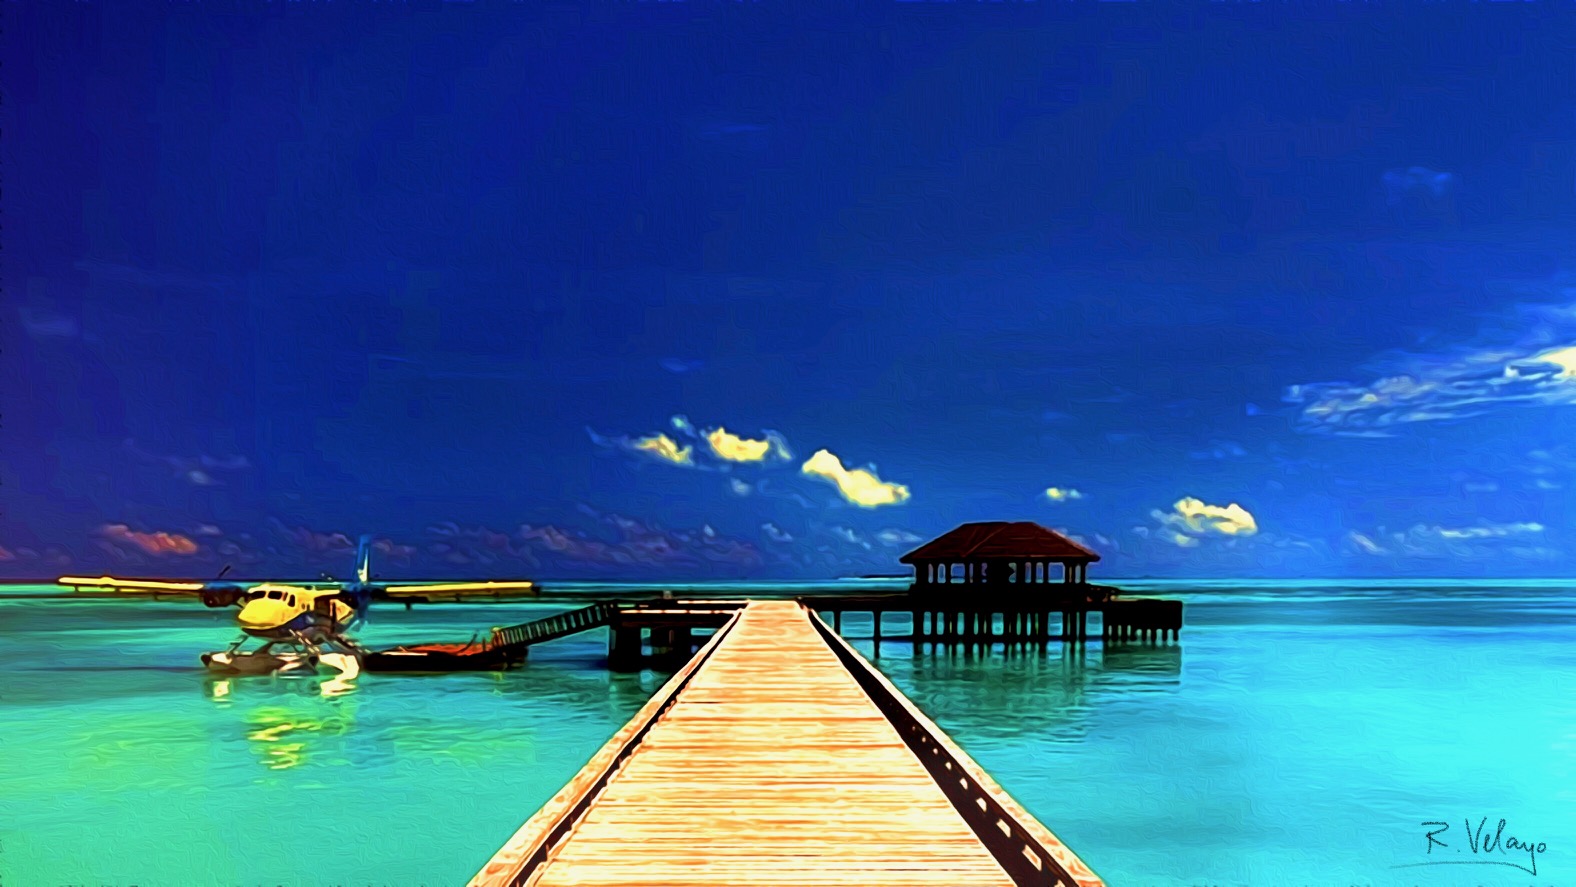 "PLANE AND PIER IN THE CARIBBEAN SEA" [Created: 2/04/2022]